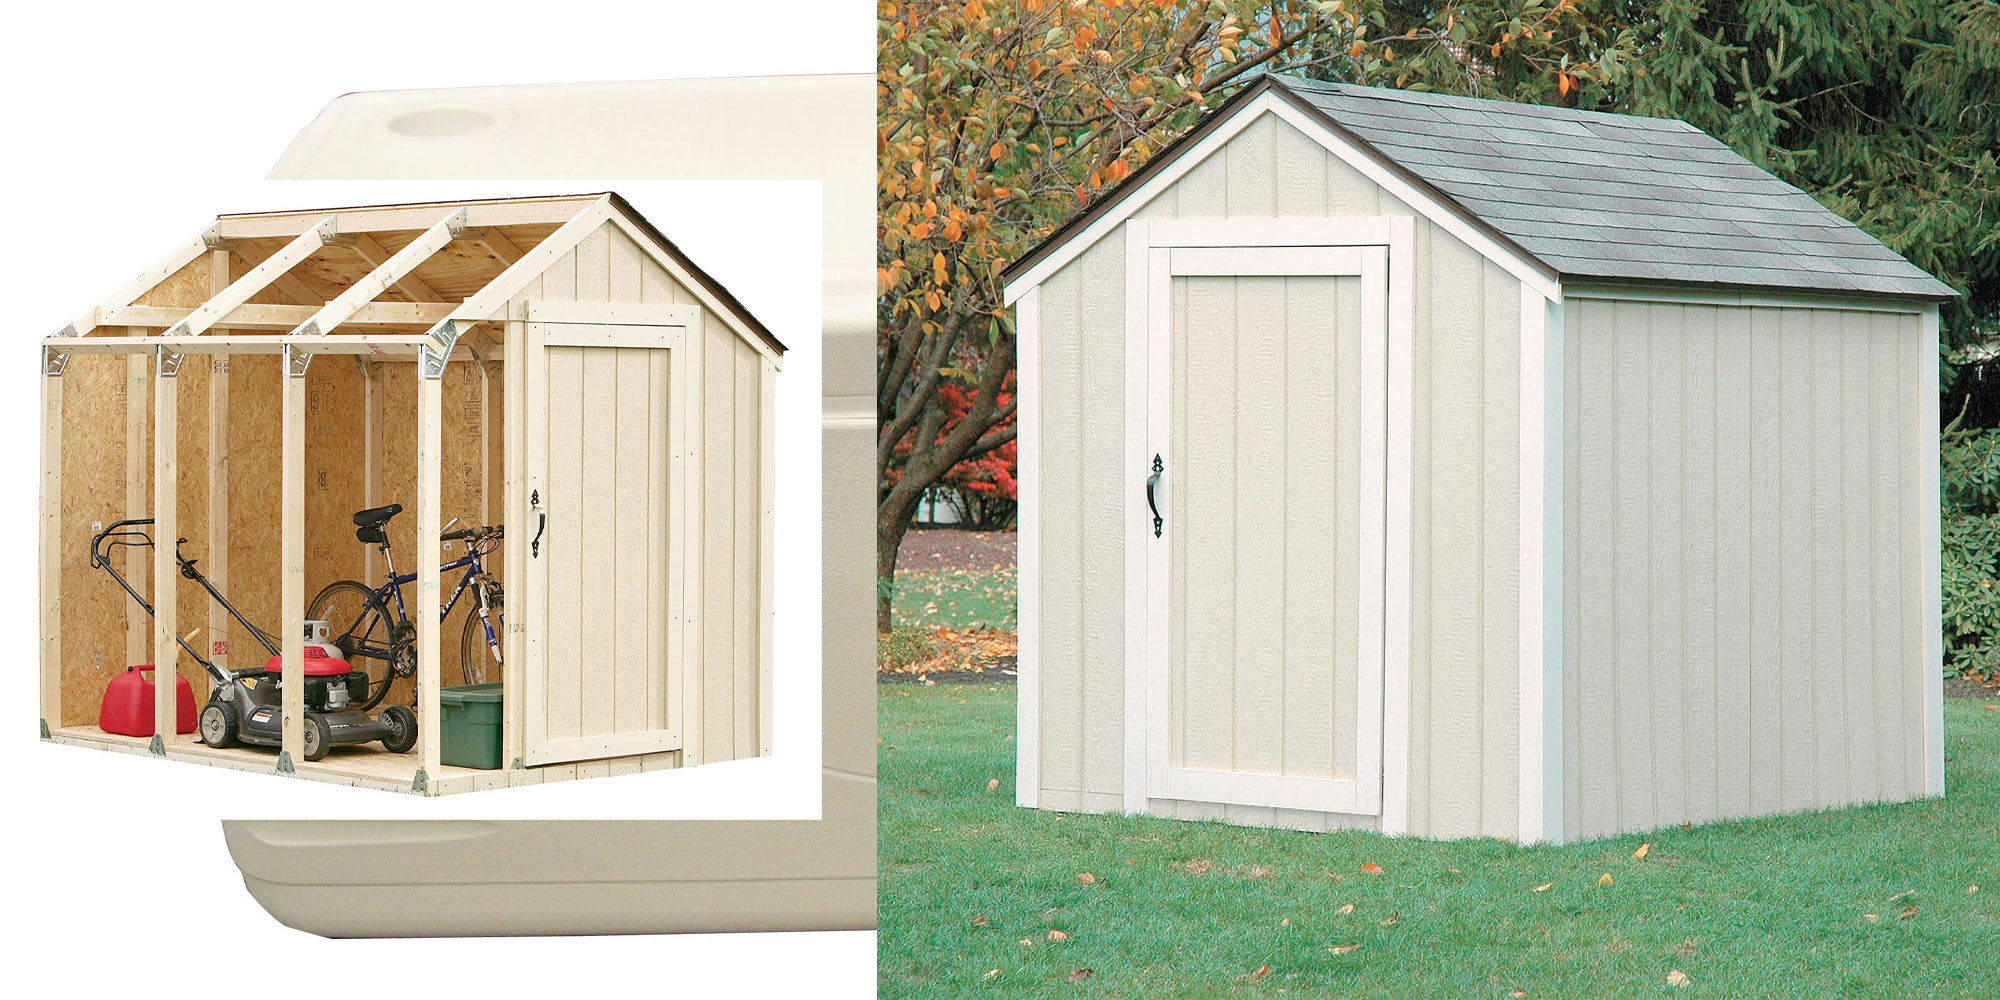 Build your own shed w/ this 2x4 Basics kit for just $48 shipped on ...